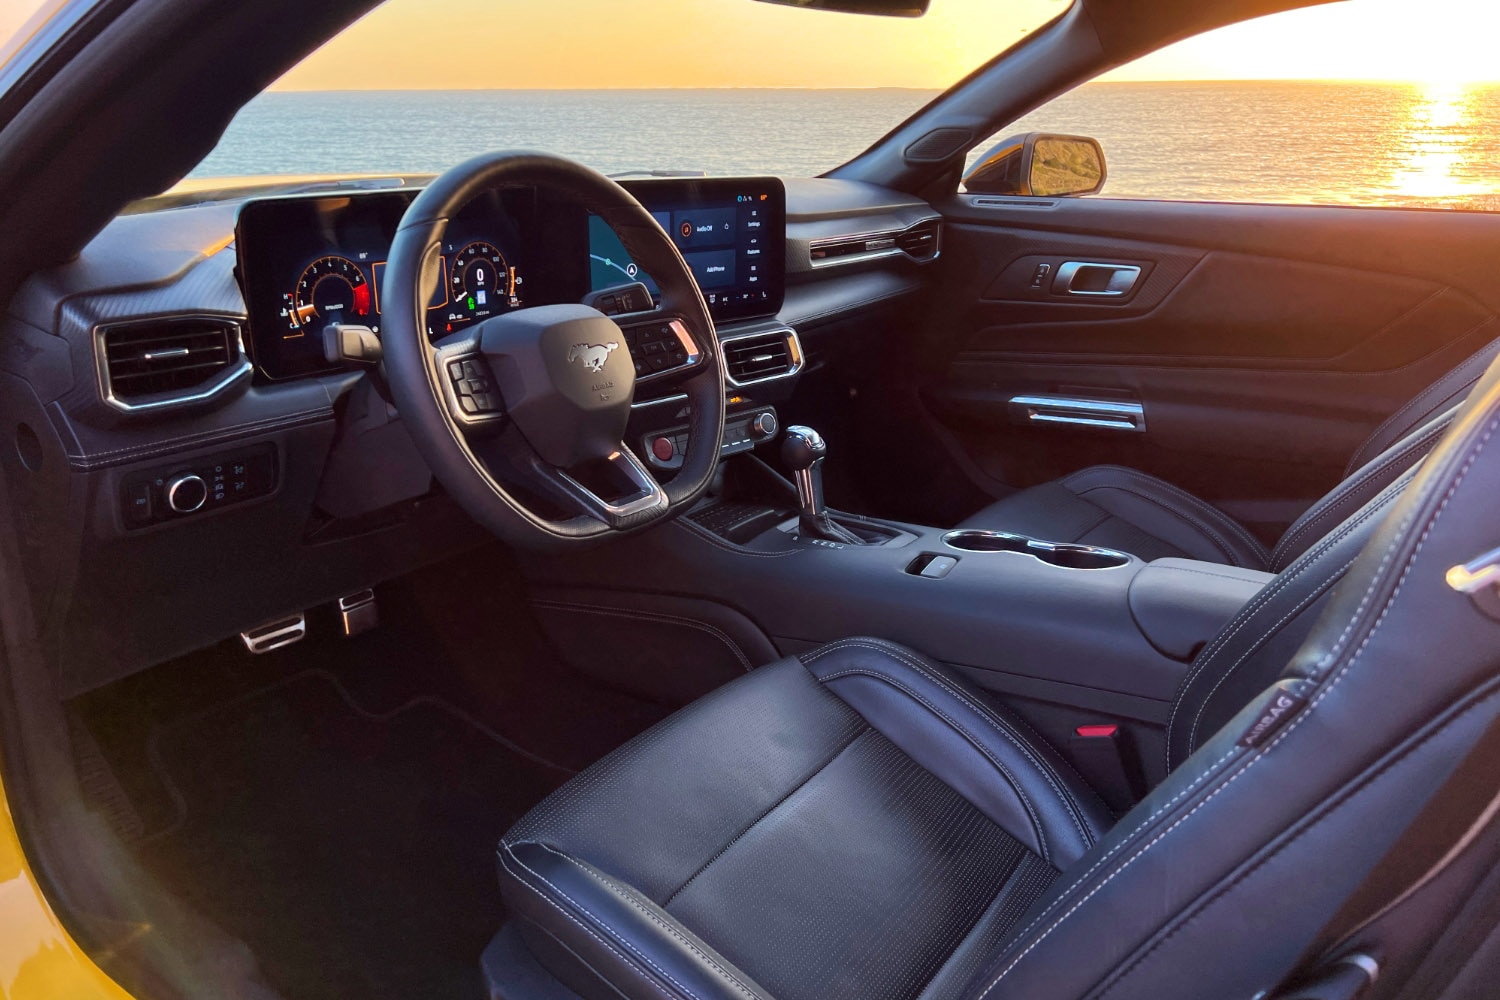 2024 Ford Mustang interior, dashboard, and front seats against the sun setting into the Pacific Ocean